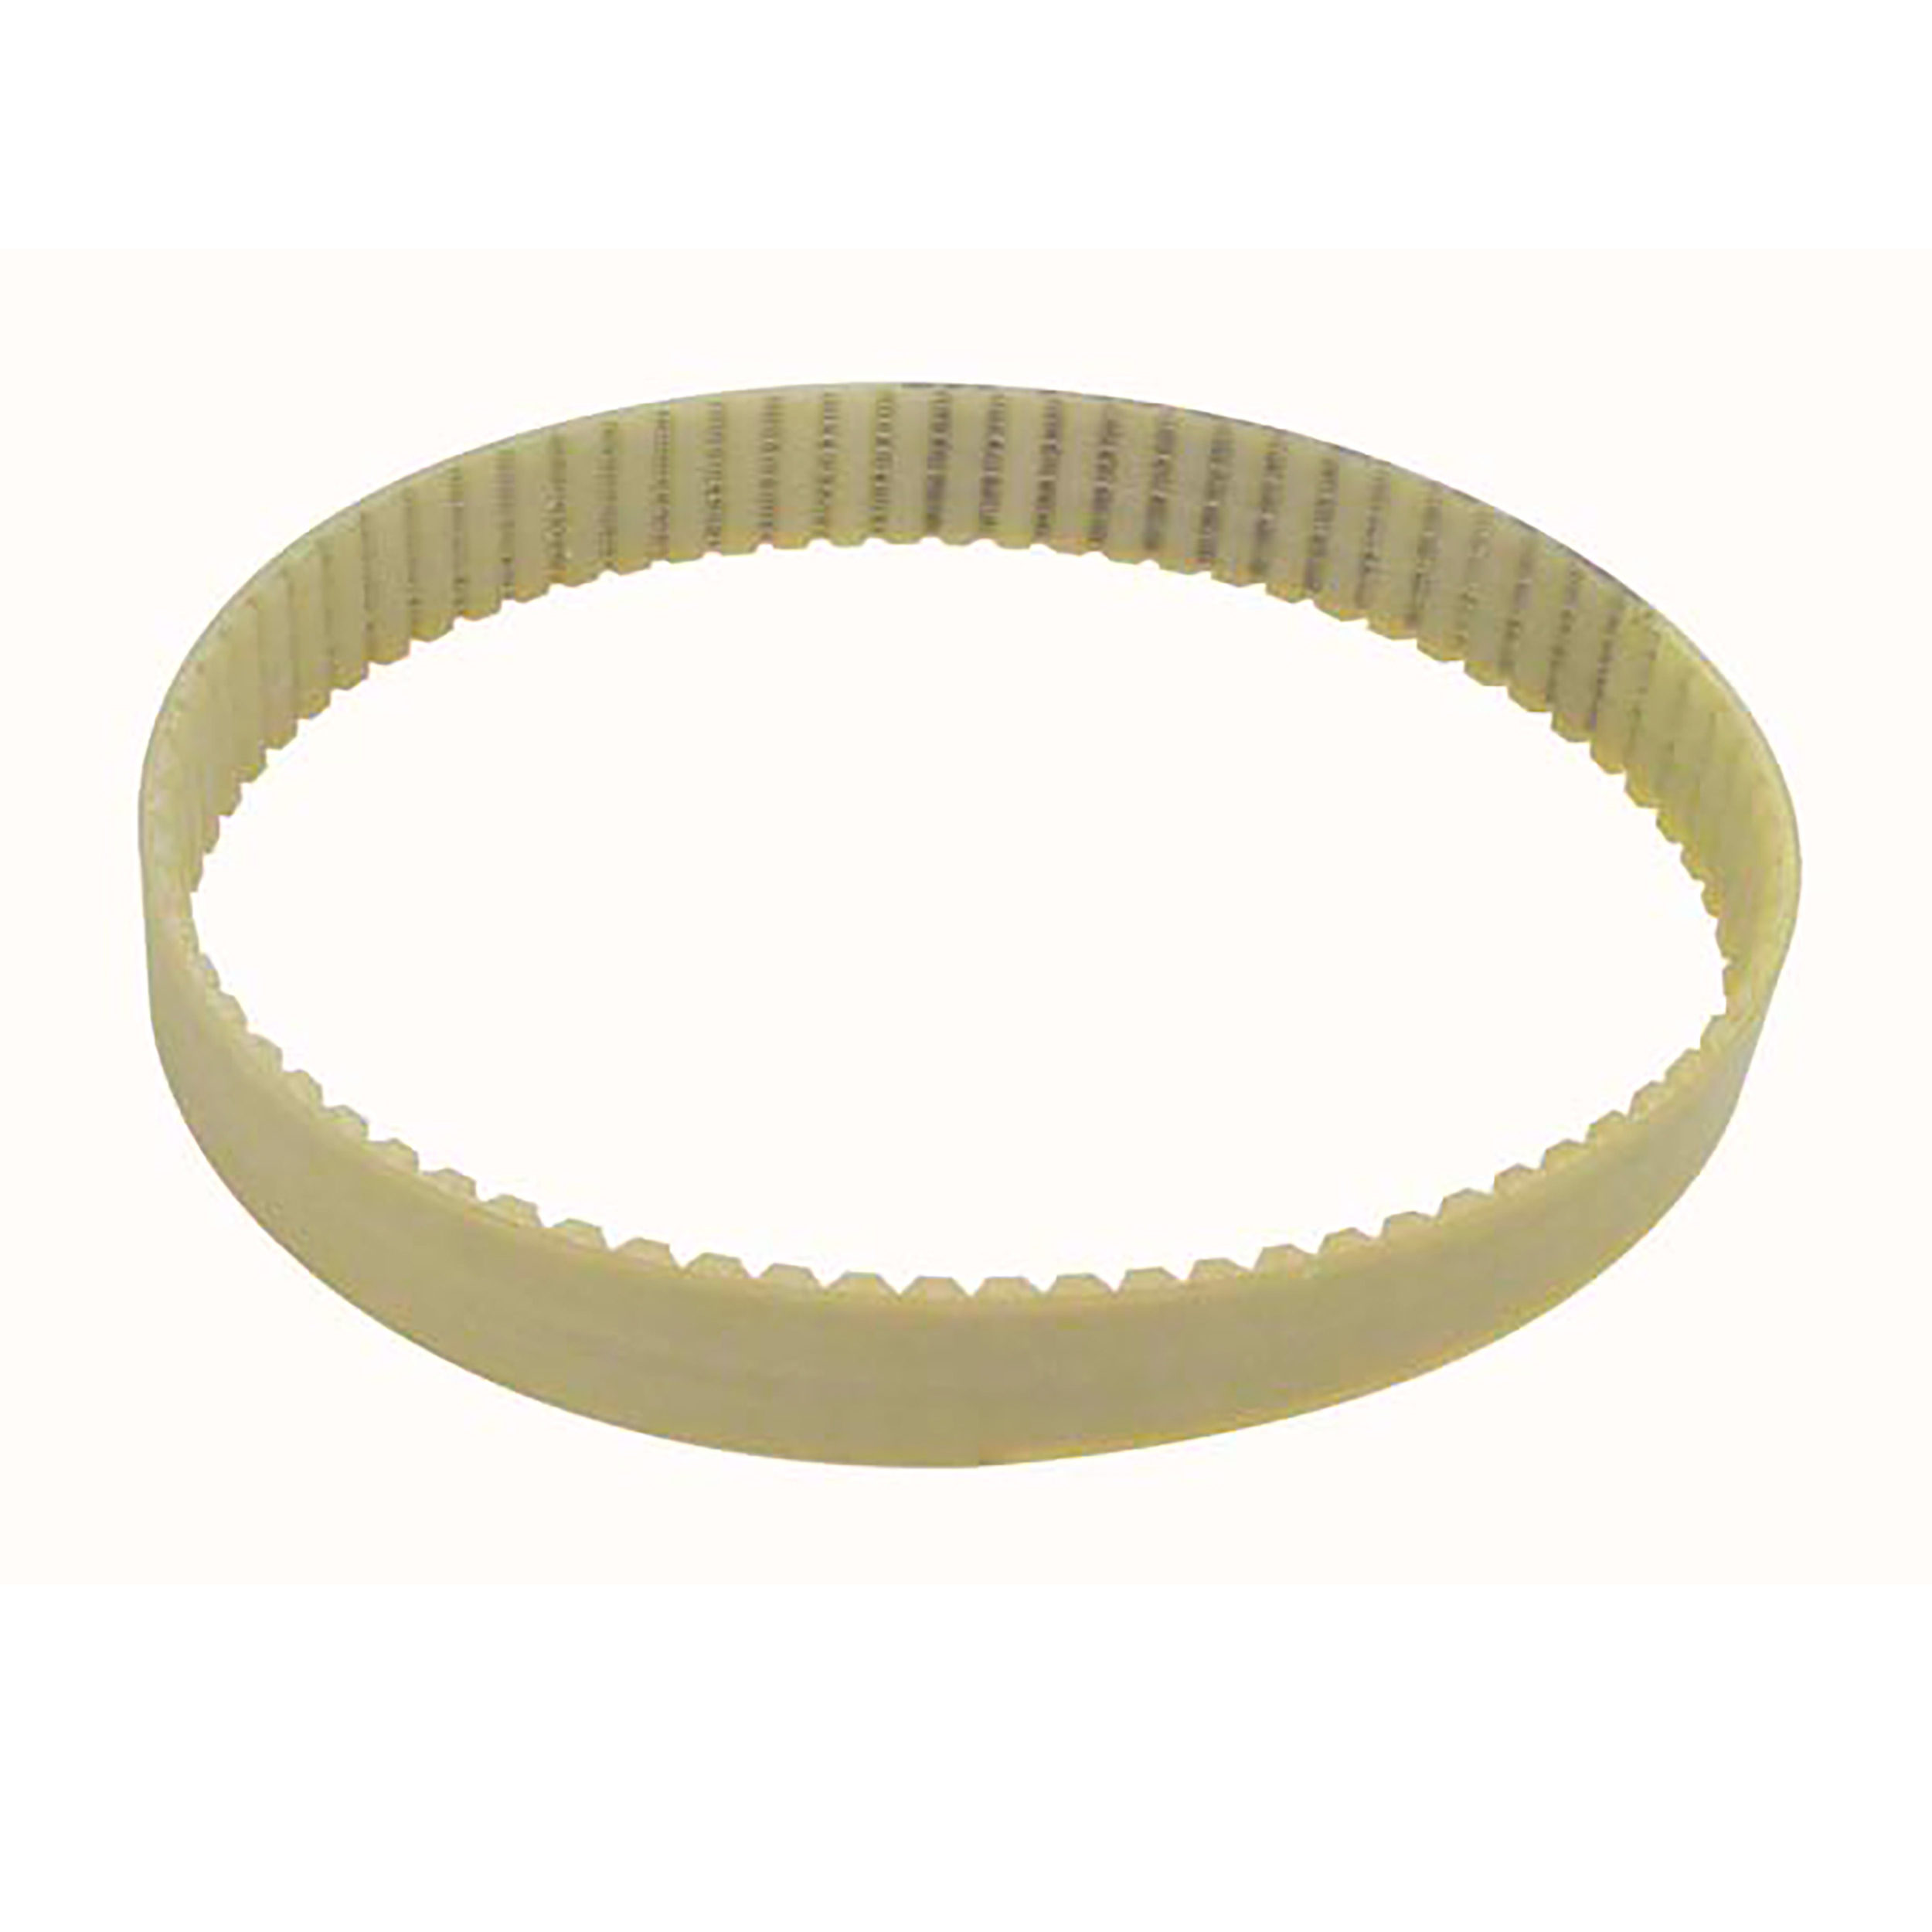 AT type timing belt - AT10 Steel cored polyurethane - 50mm - AT